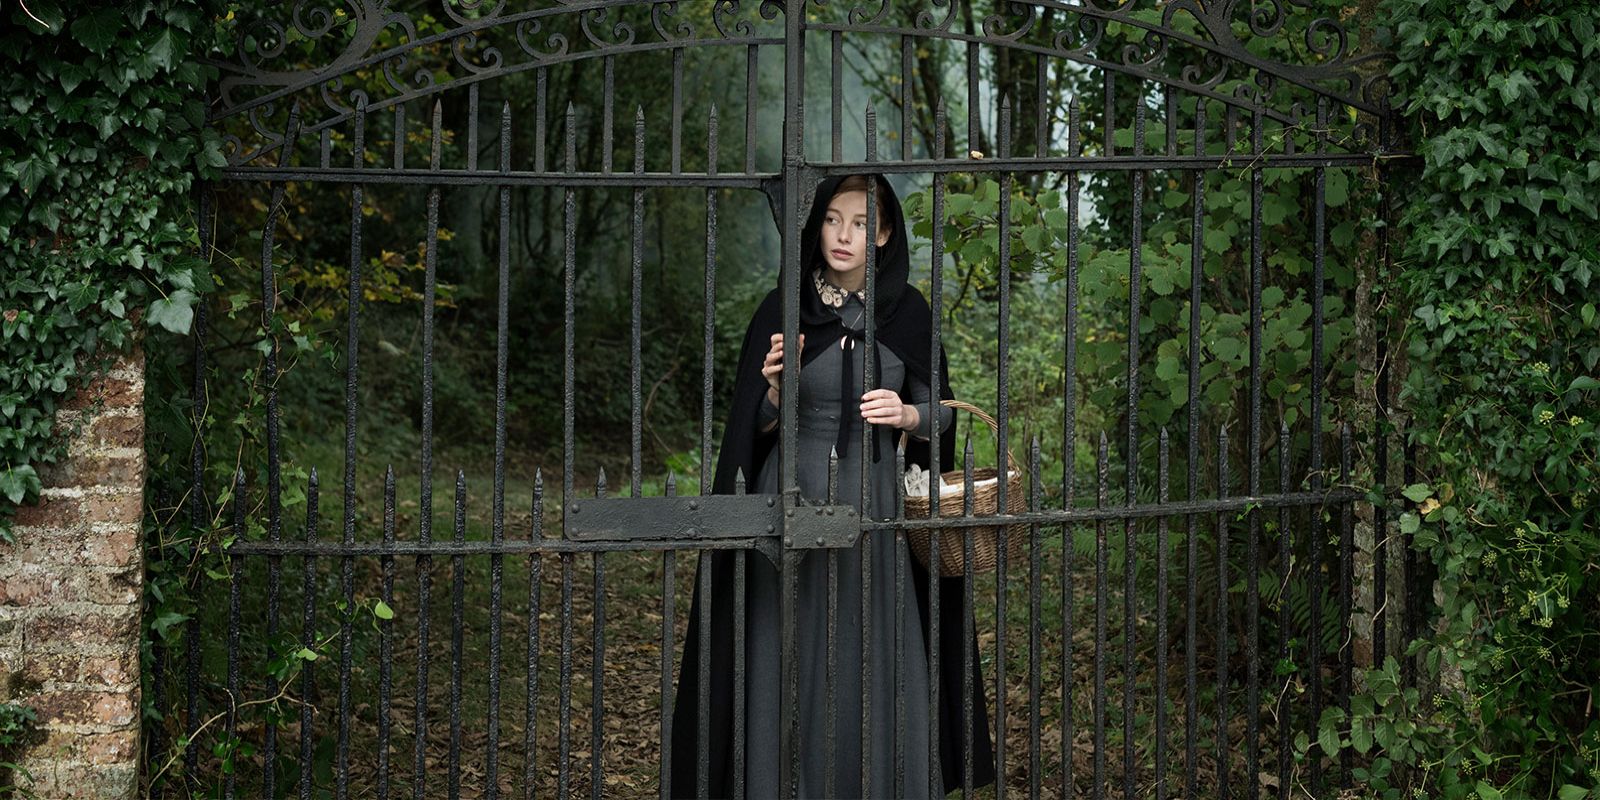 Rachel stands behind the gates of her house in the film The Lodgers.